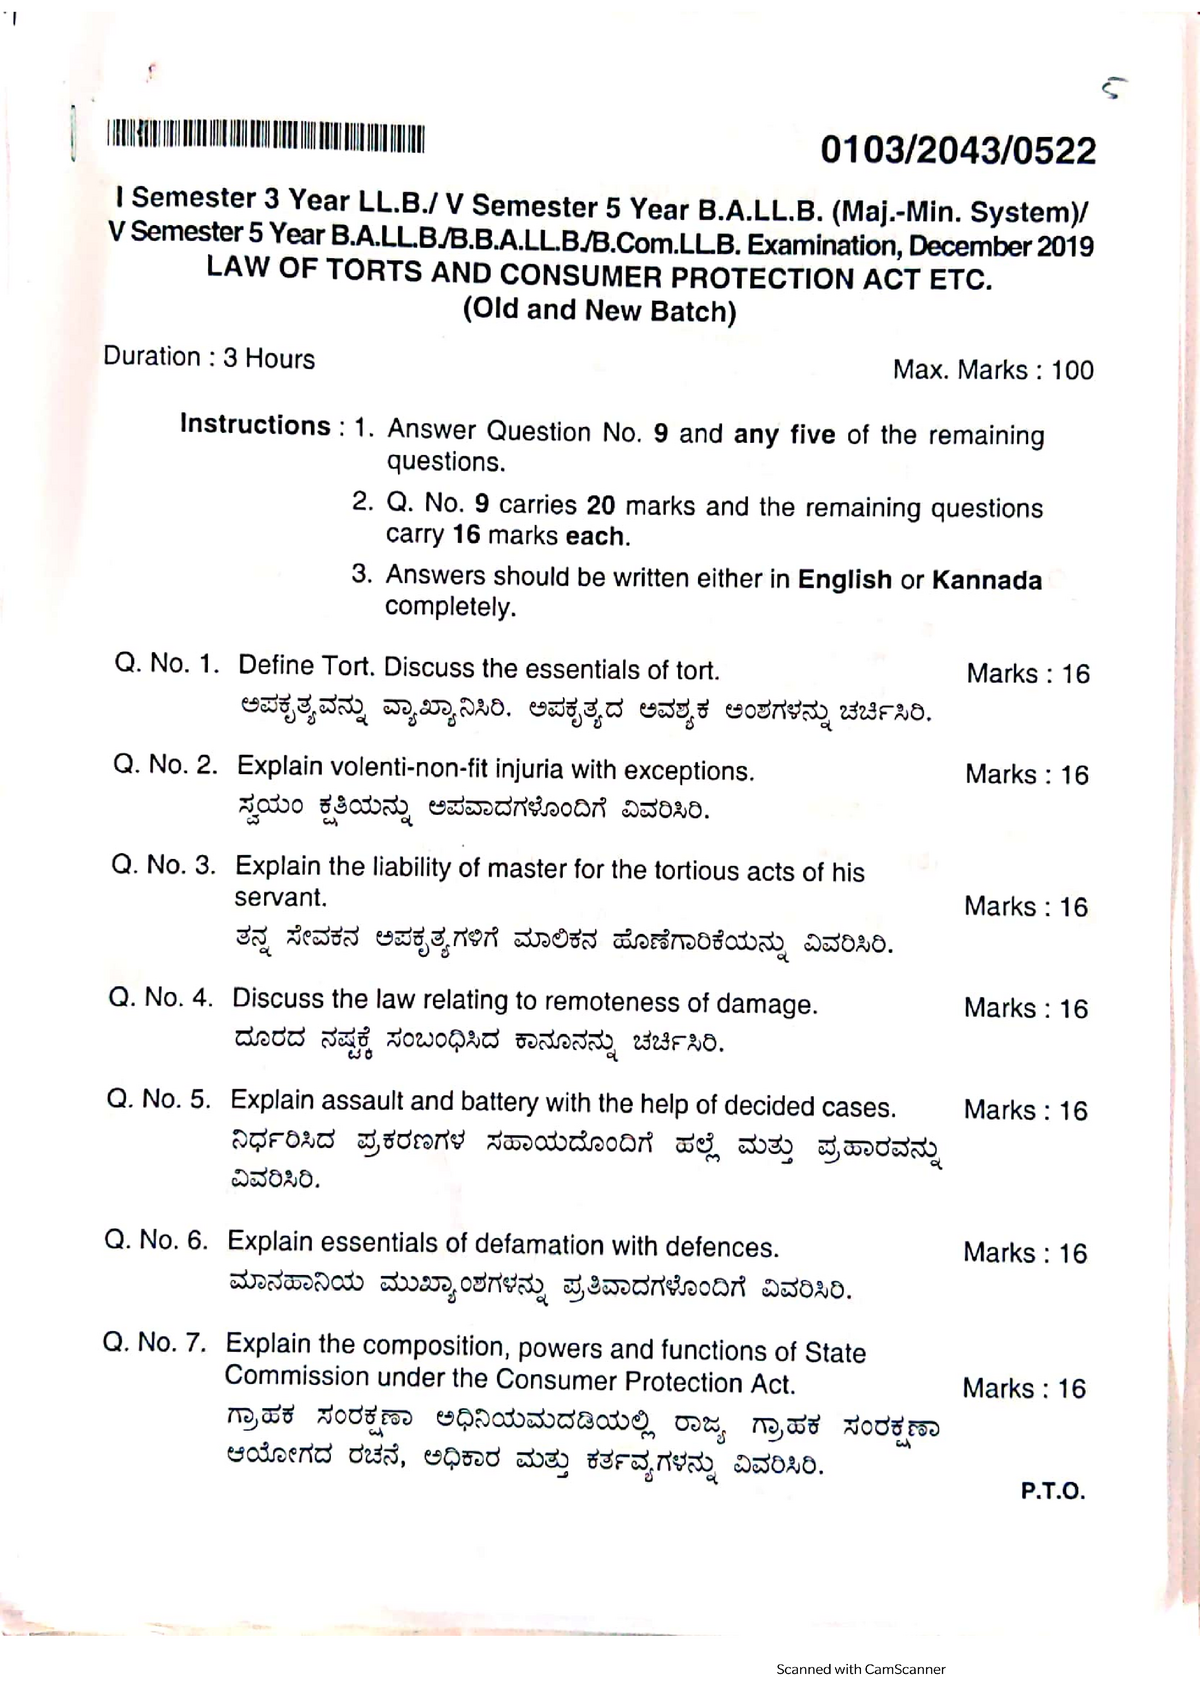 law of torts research paper topics